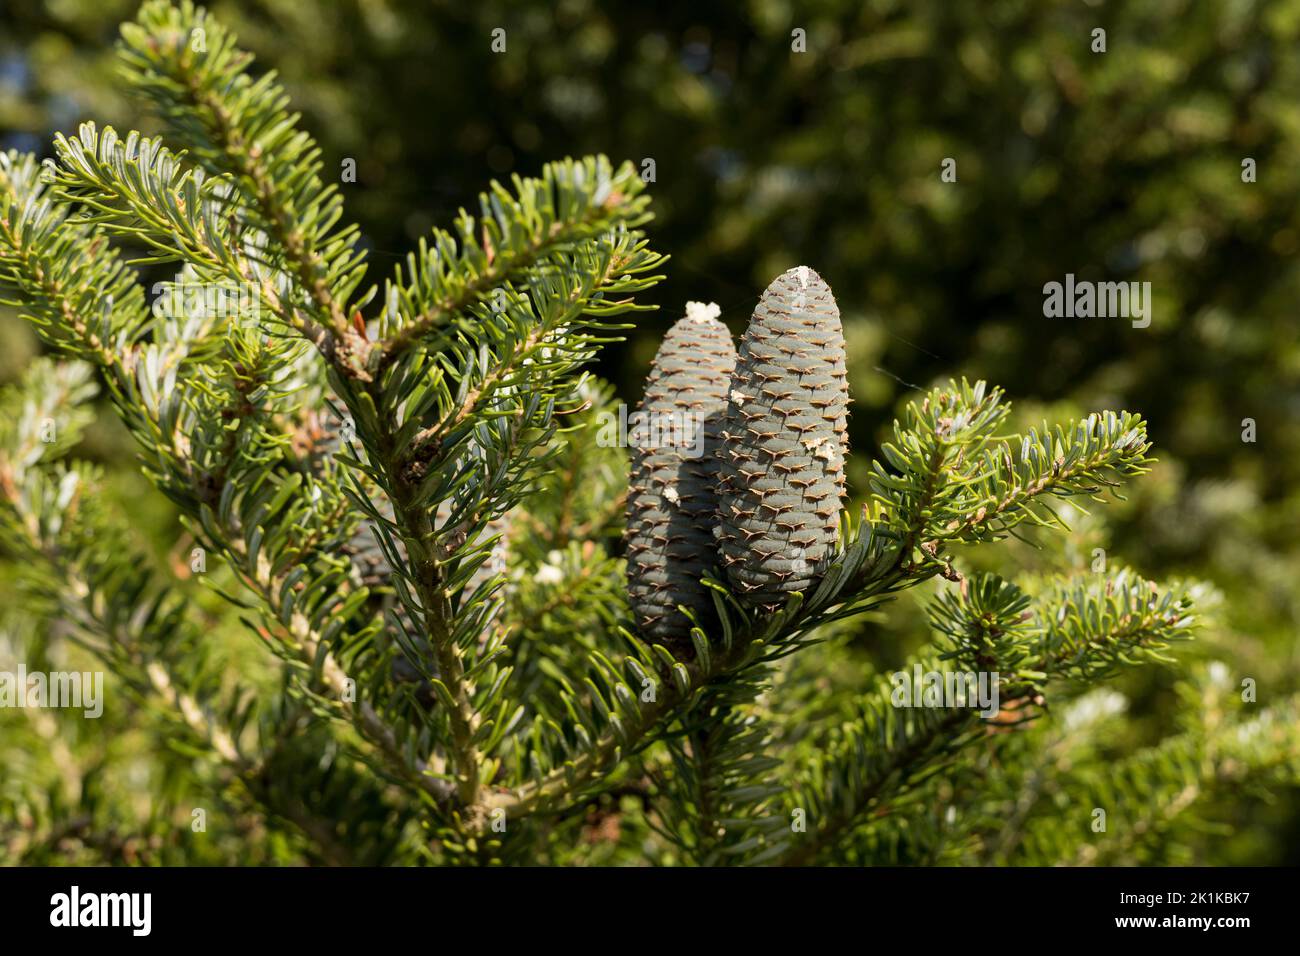 Cones and branches of korean fir (Abies koreana). Stock Photo